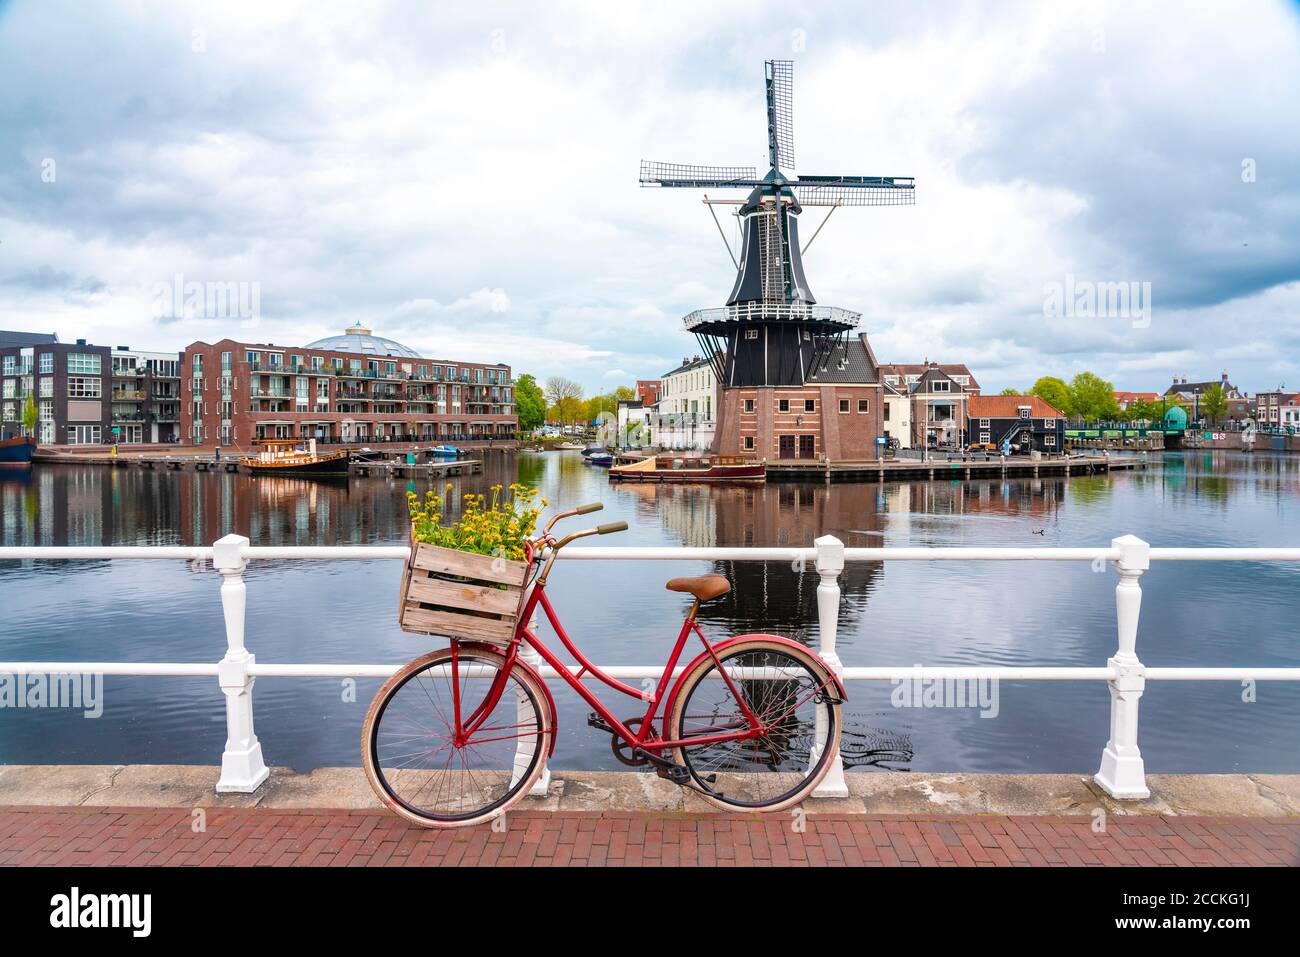 Netherlands, North Holland, Haarlem, Bicycle parked along railing of canal bridge with De Adriaan windmill in background Stock Photo